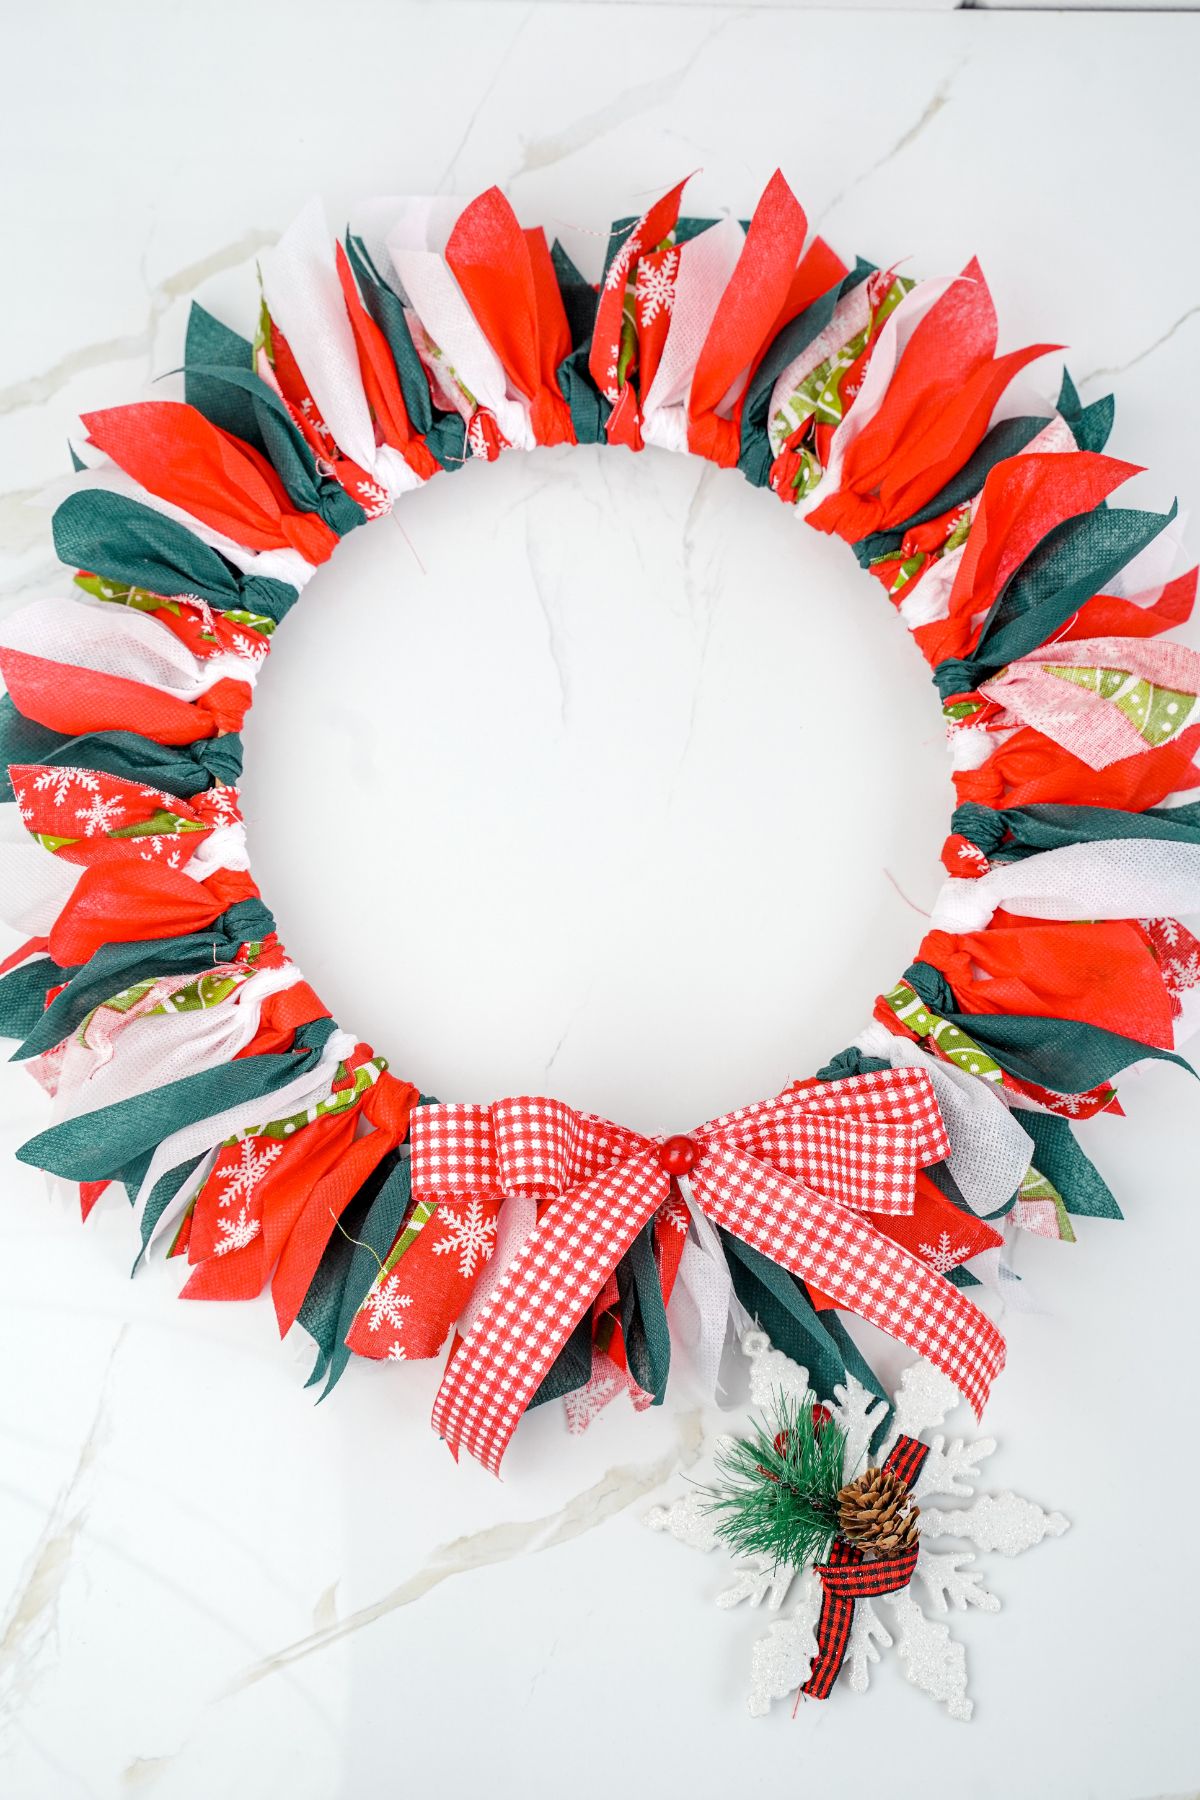 Christmas rag wreath laying on a marble table